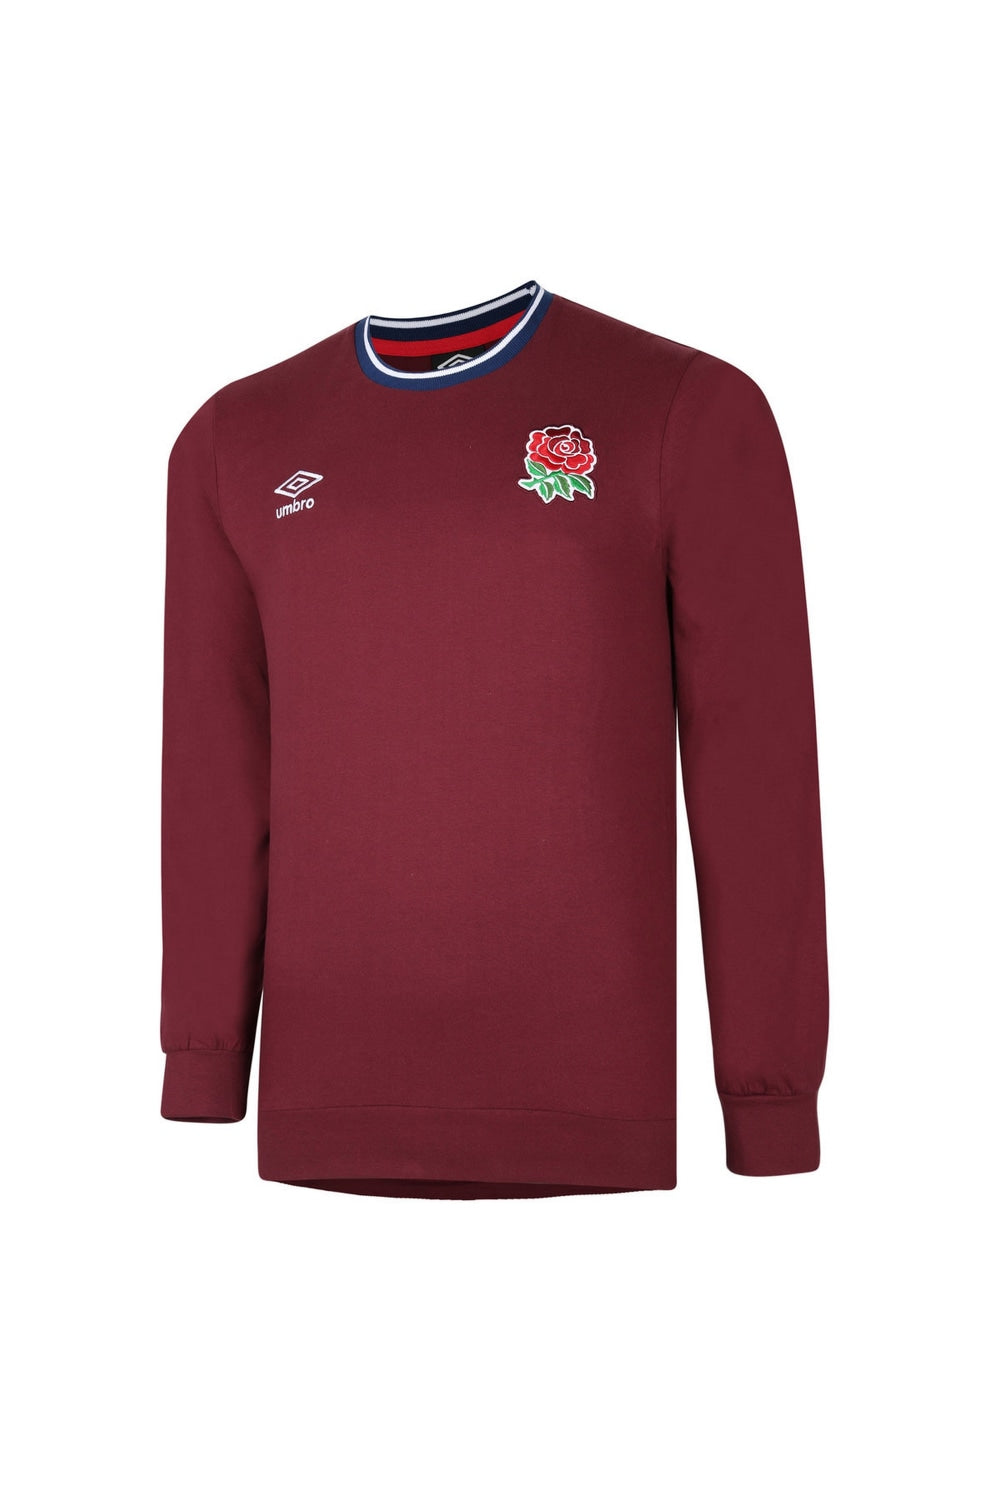 England Rugby Mens Classic Jersey - Merlot/Navy/White